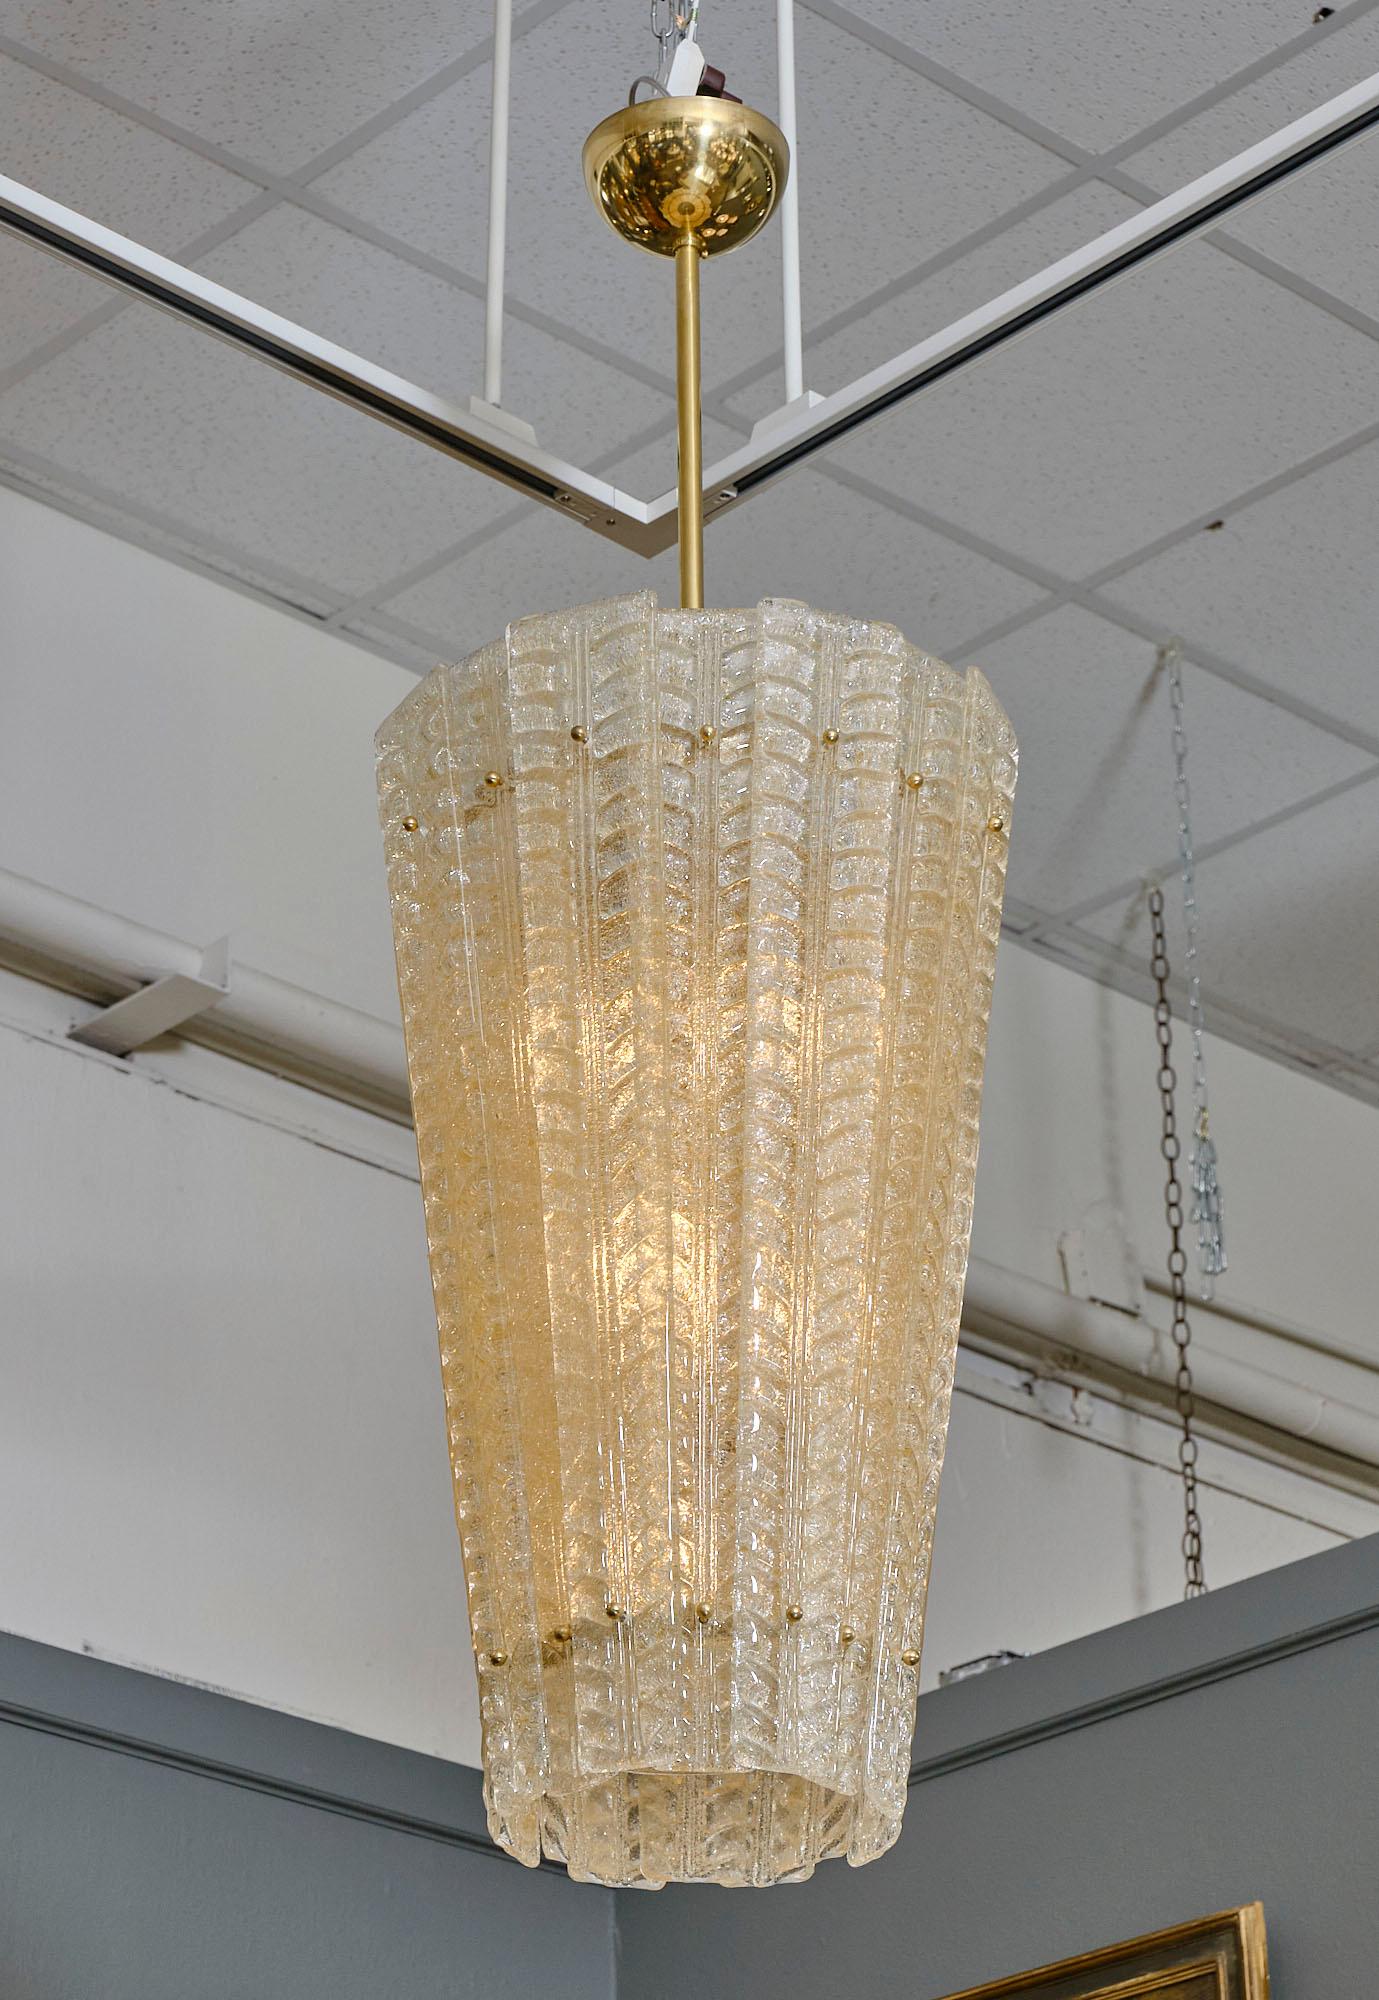 Lantern, Italian, from the Island of Murano. ”Pulegoso” glass blades are fused with 24 carat gold powder and attached to a gilt brass structure to form this stunning fixture.

This fixture is a special order from Italy. Please contact us for a lead